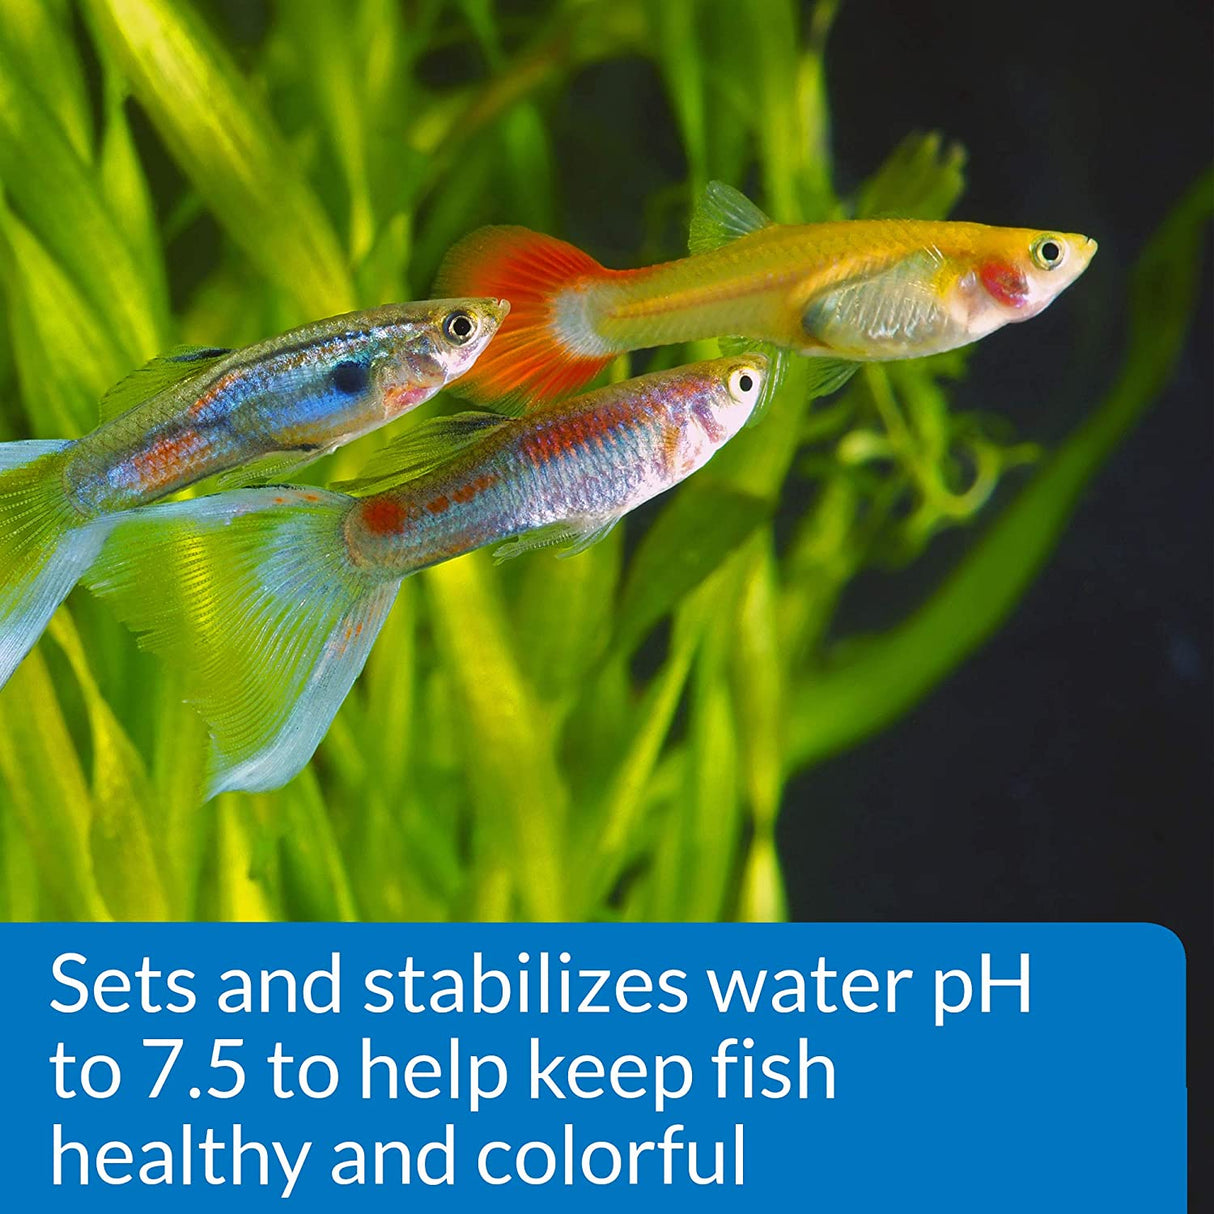 pH 7.5 - 1 count API Proper pH Sets and Stabilizes Freshwater Aquariums